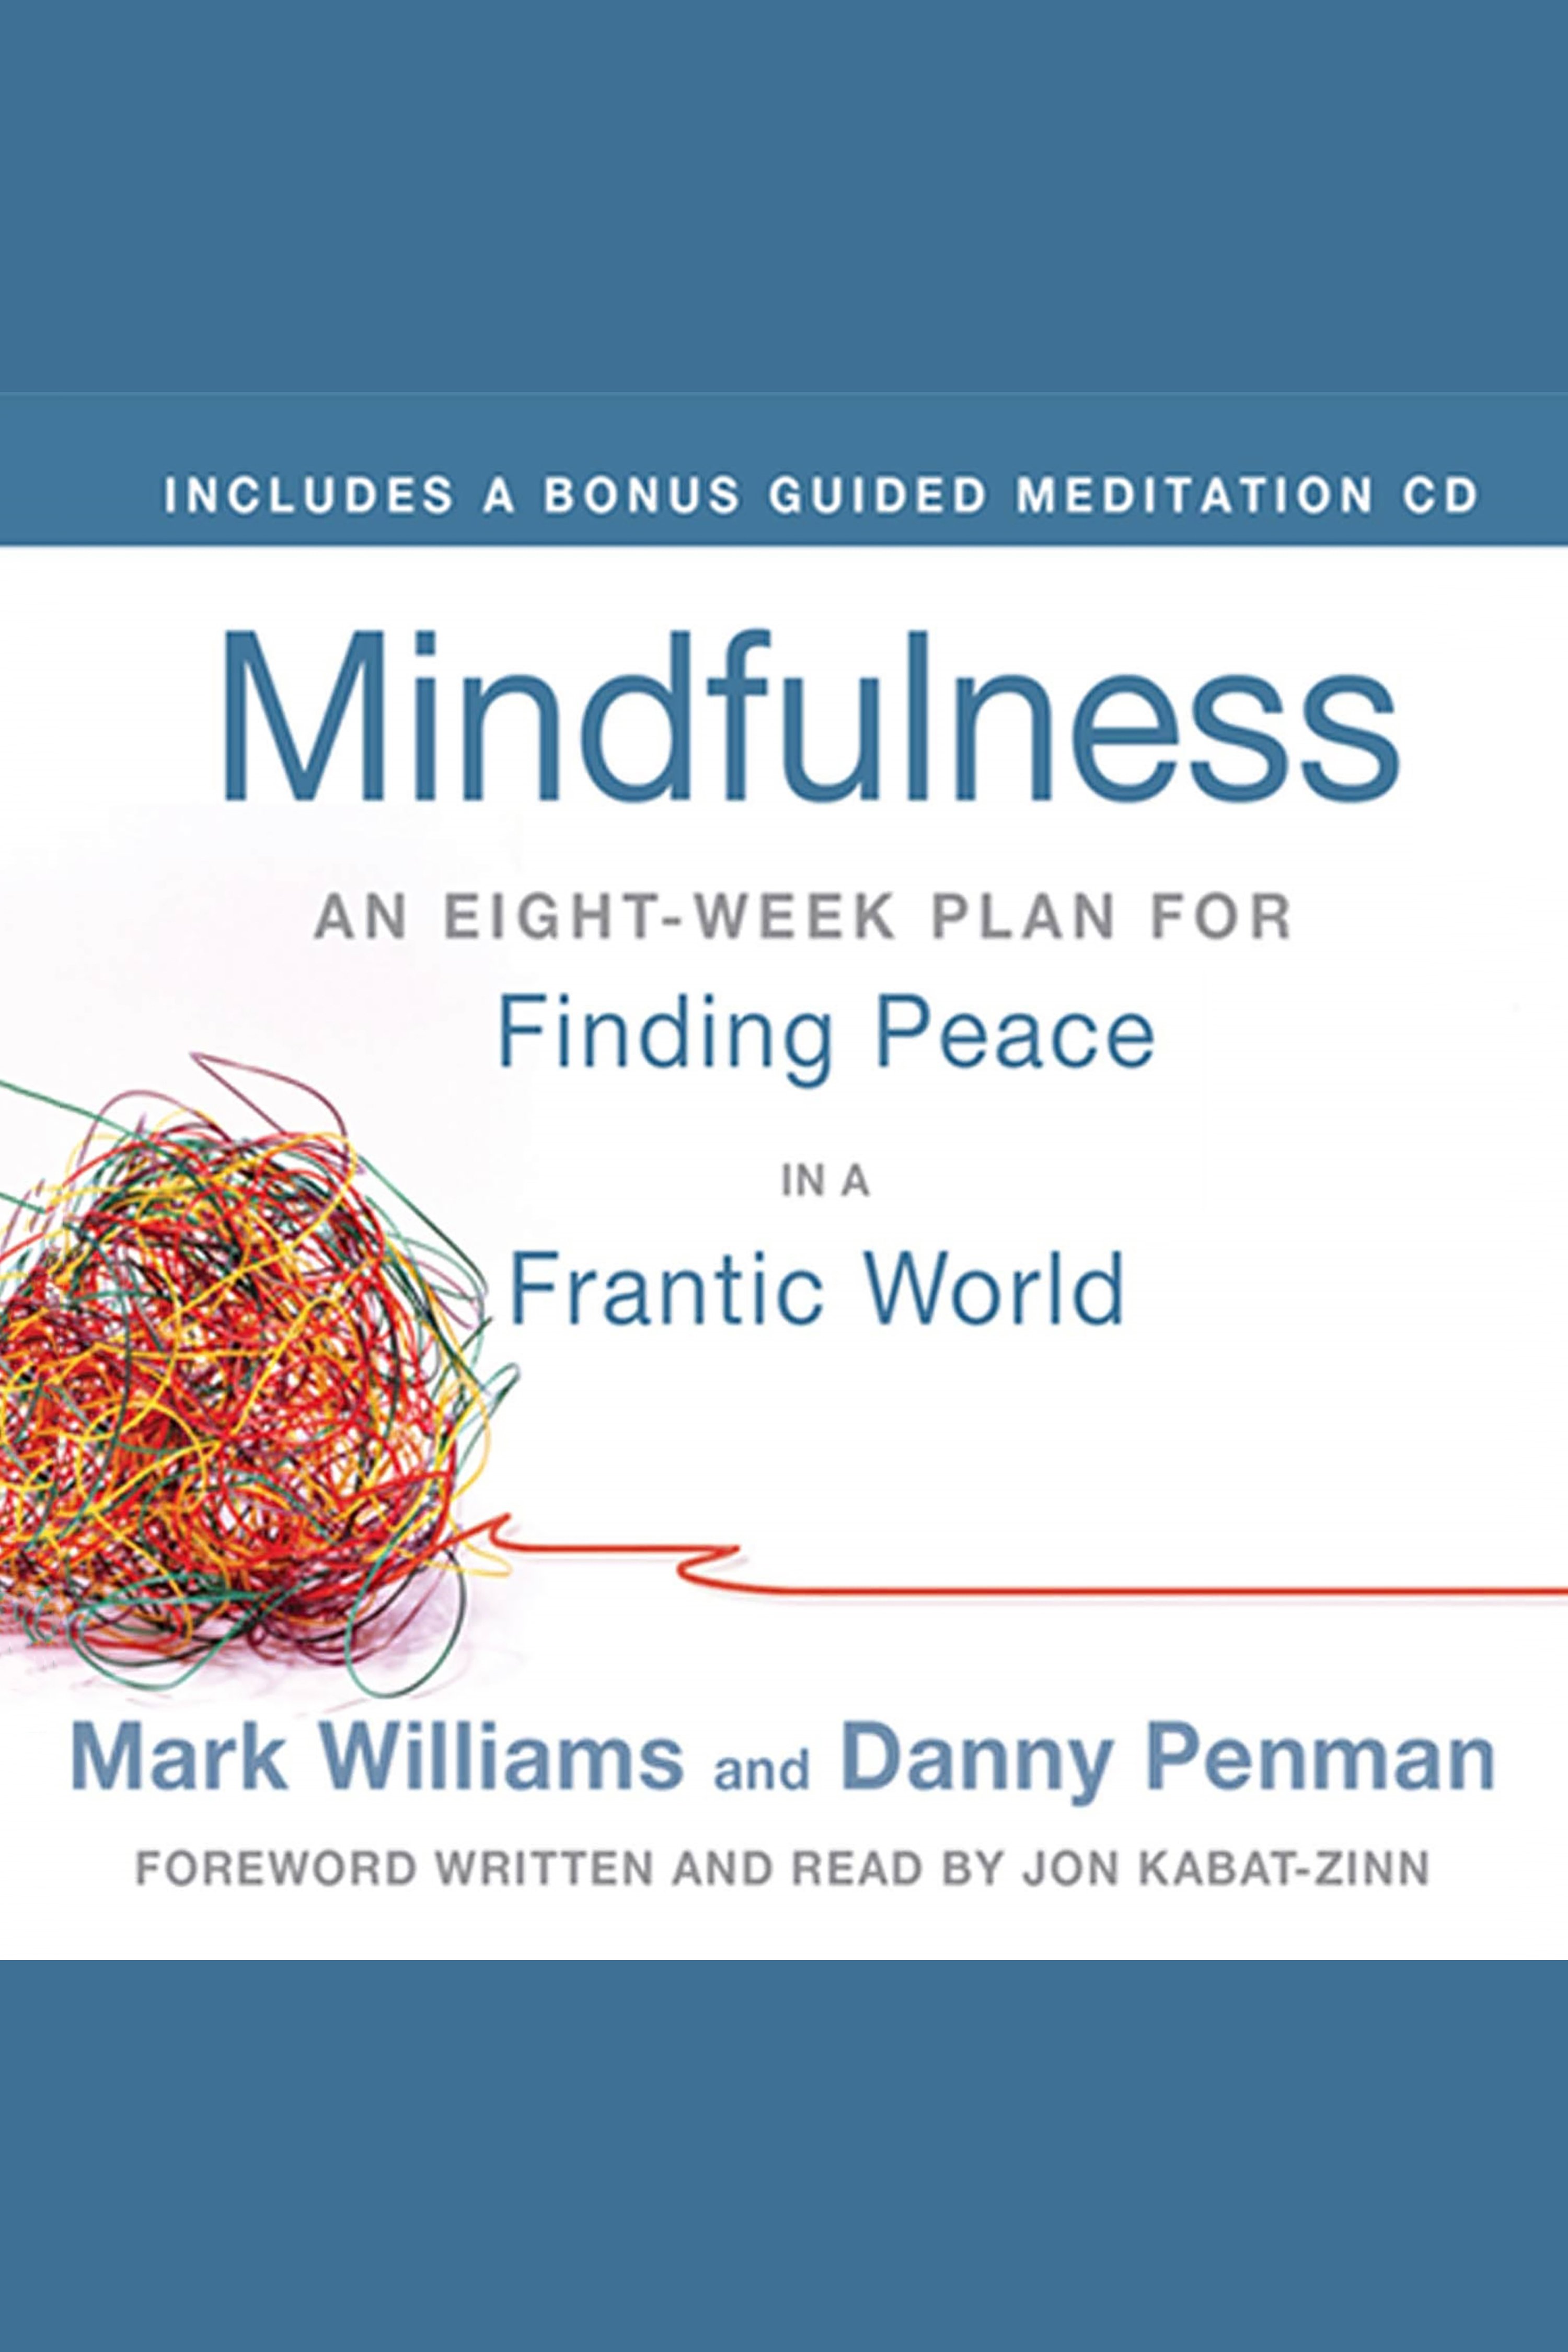 Mindfulness an eight-week plan for finding peace in a frantic world cover image